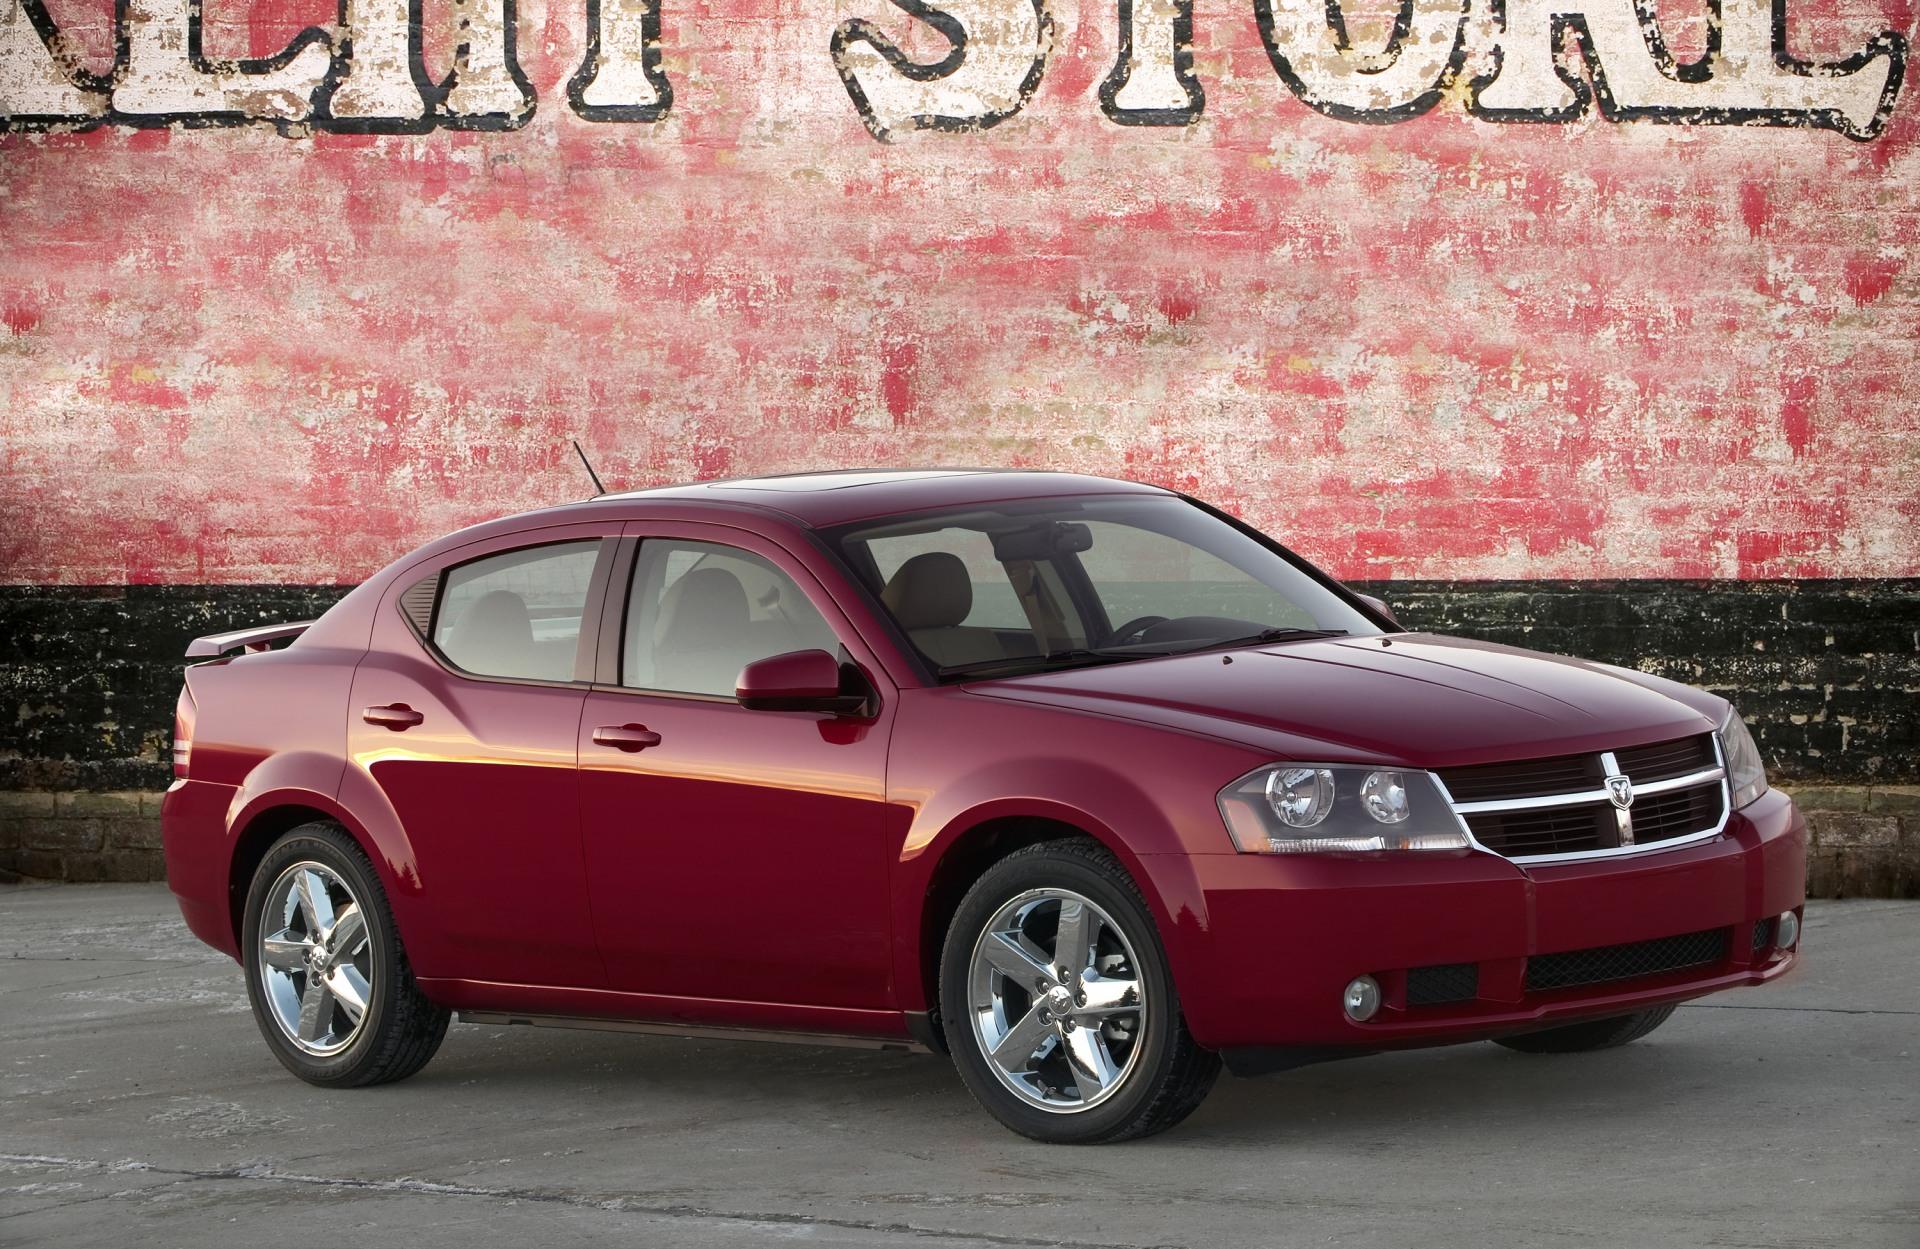 2023 Dodge Avenger Srt Review and Release date